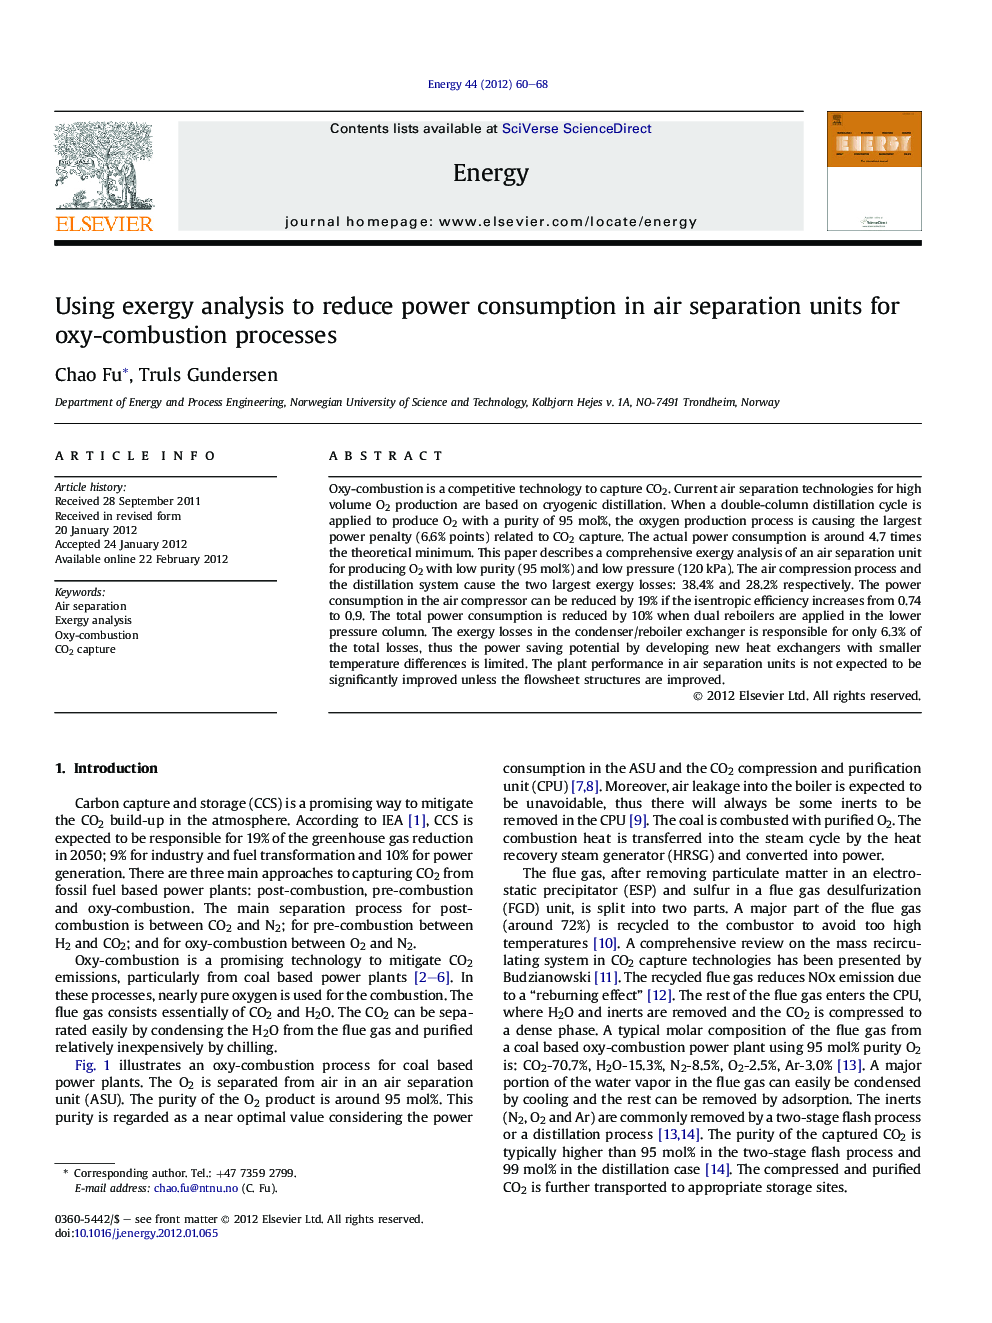 Using exergy analysis to reduce power consumption in air separation units for oxy-combustion processes